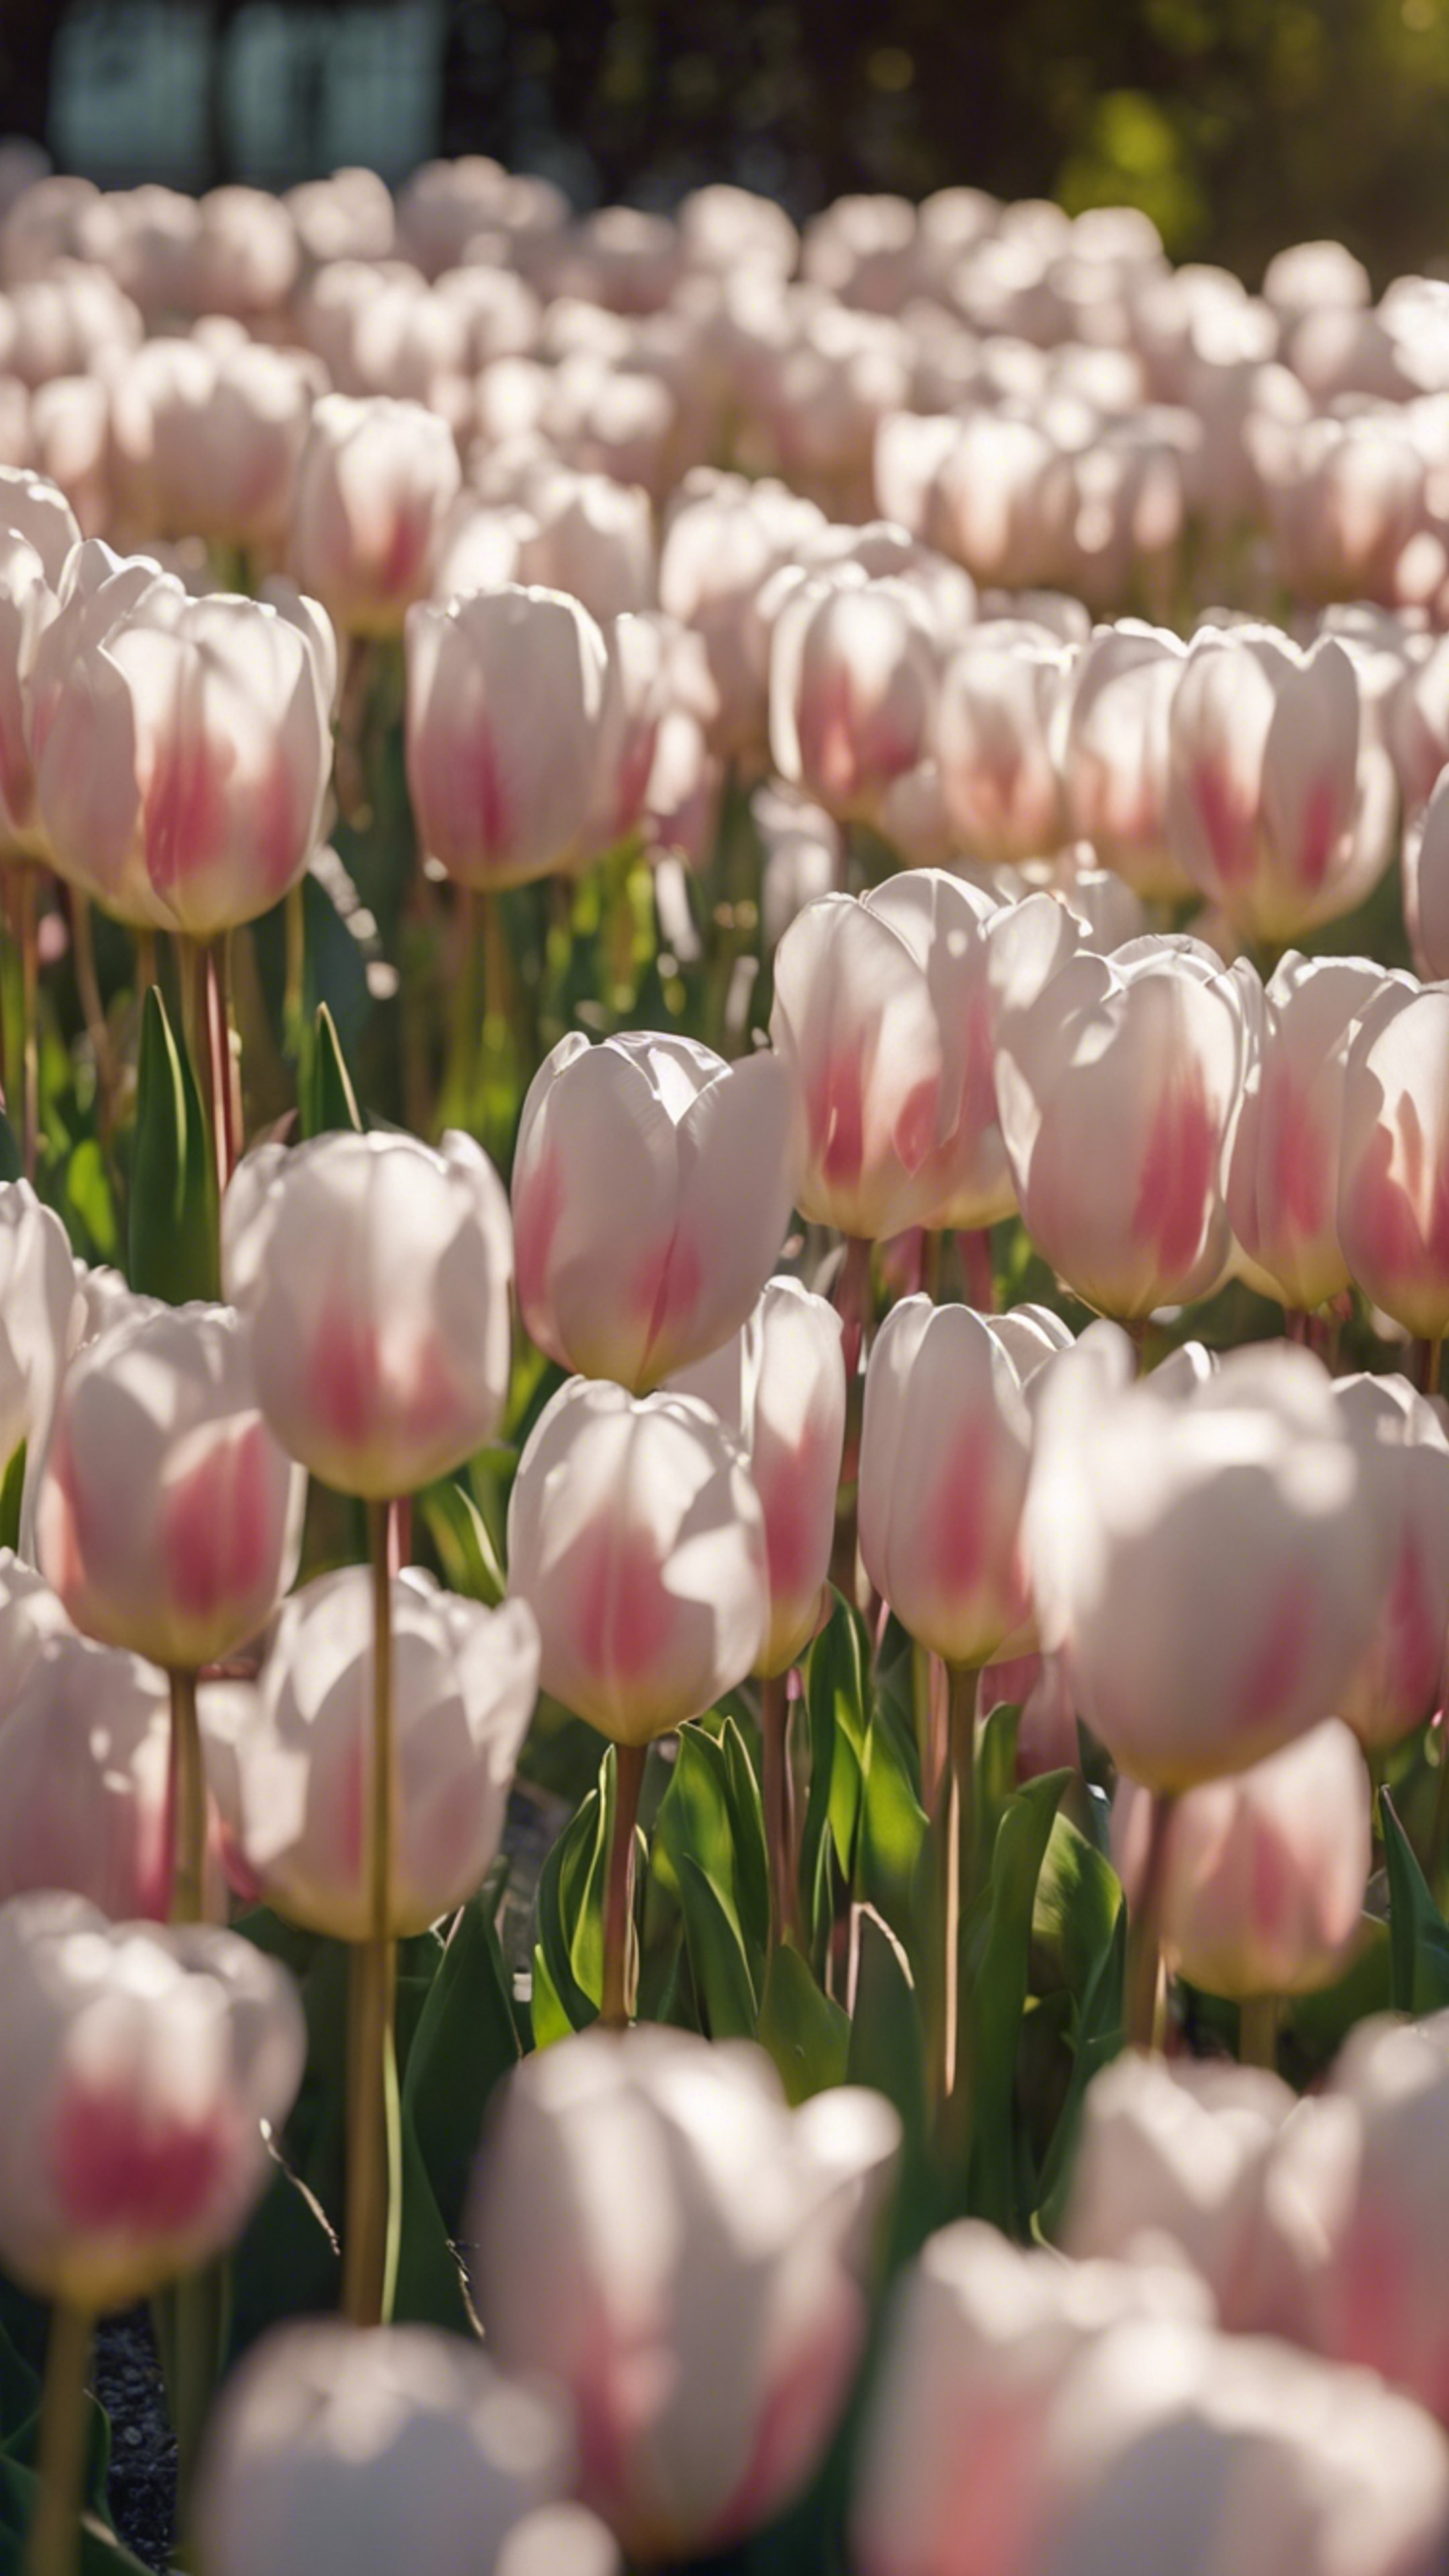 A garden filled with white and pink tulips, shimmering under the soft glow of a morning sun. วอลล์เปเปอร์[0043435f230e41f4a509]